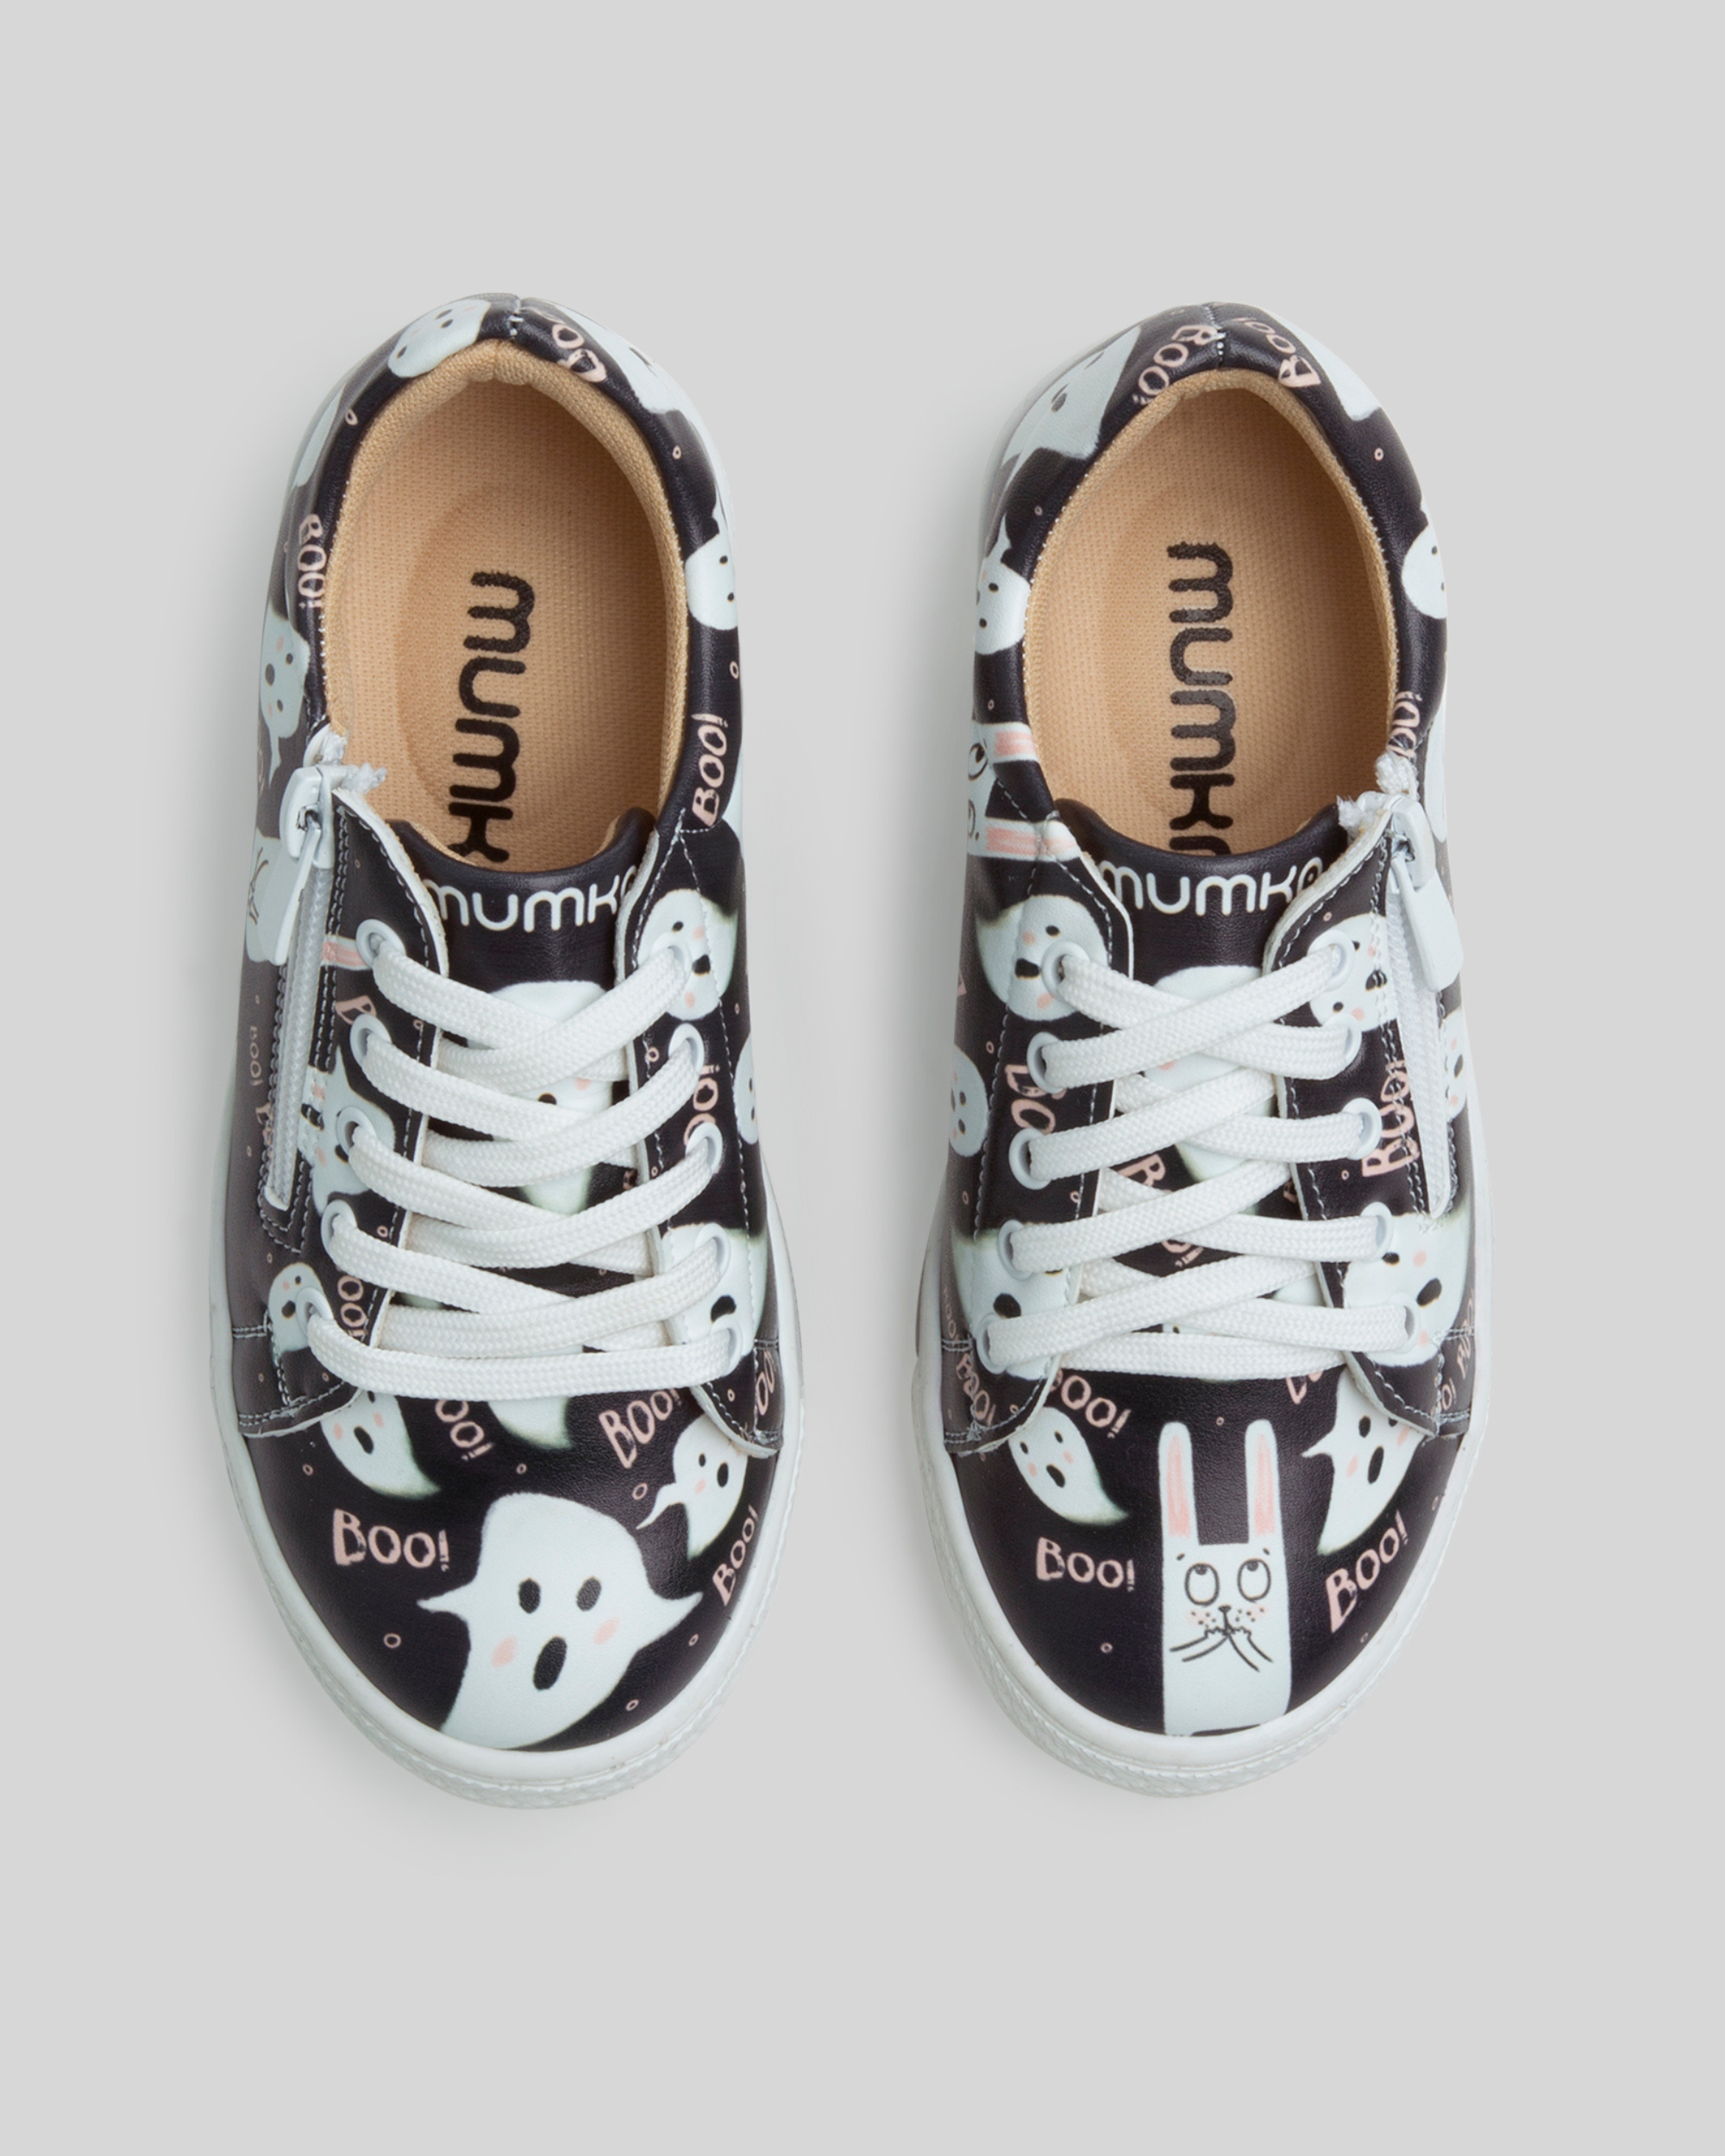 Boo & Chimmie Revolution Women's Lace-up Canvas Shoes – The BamBoozle  Project